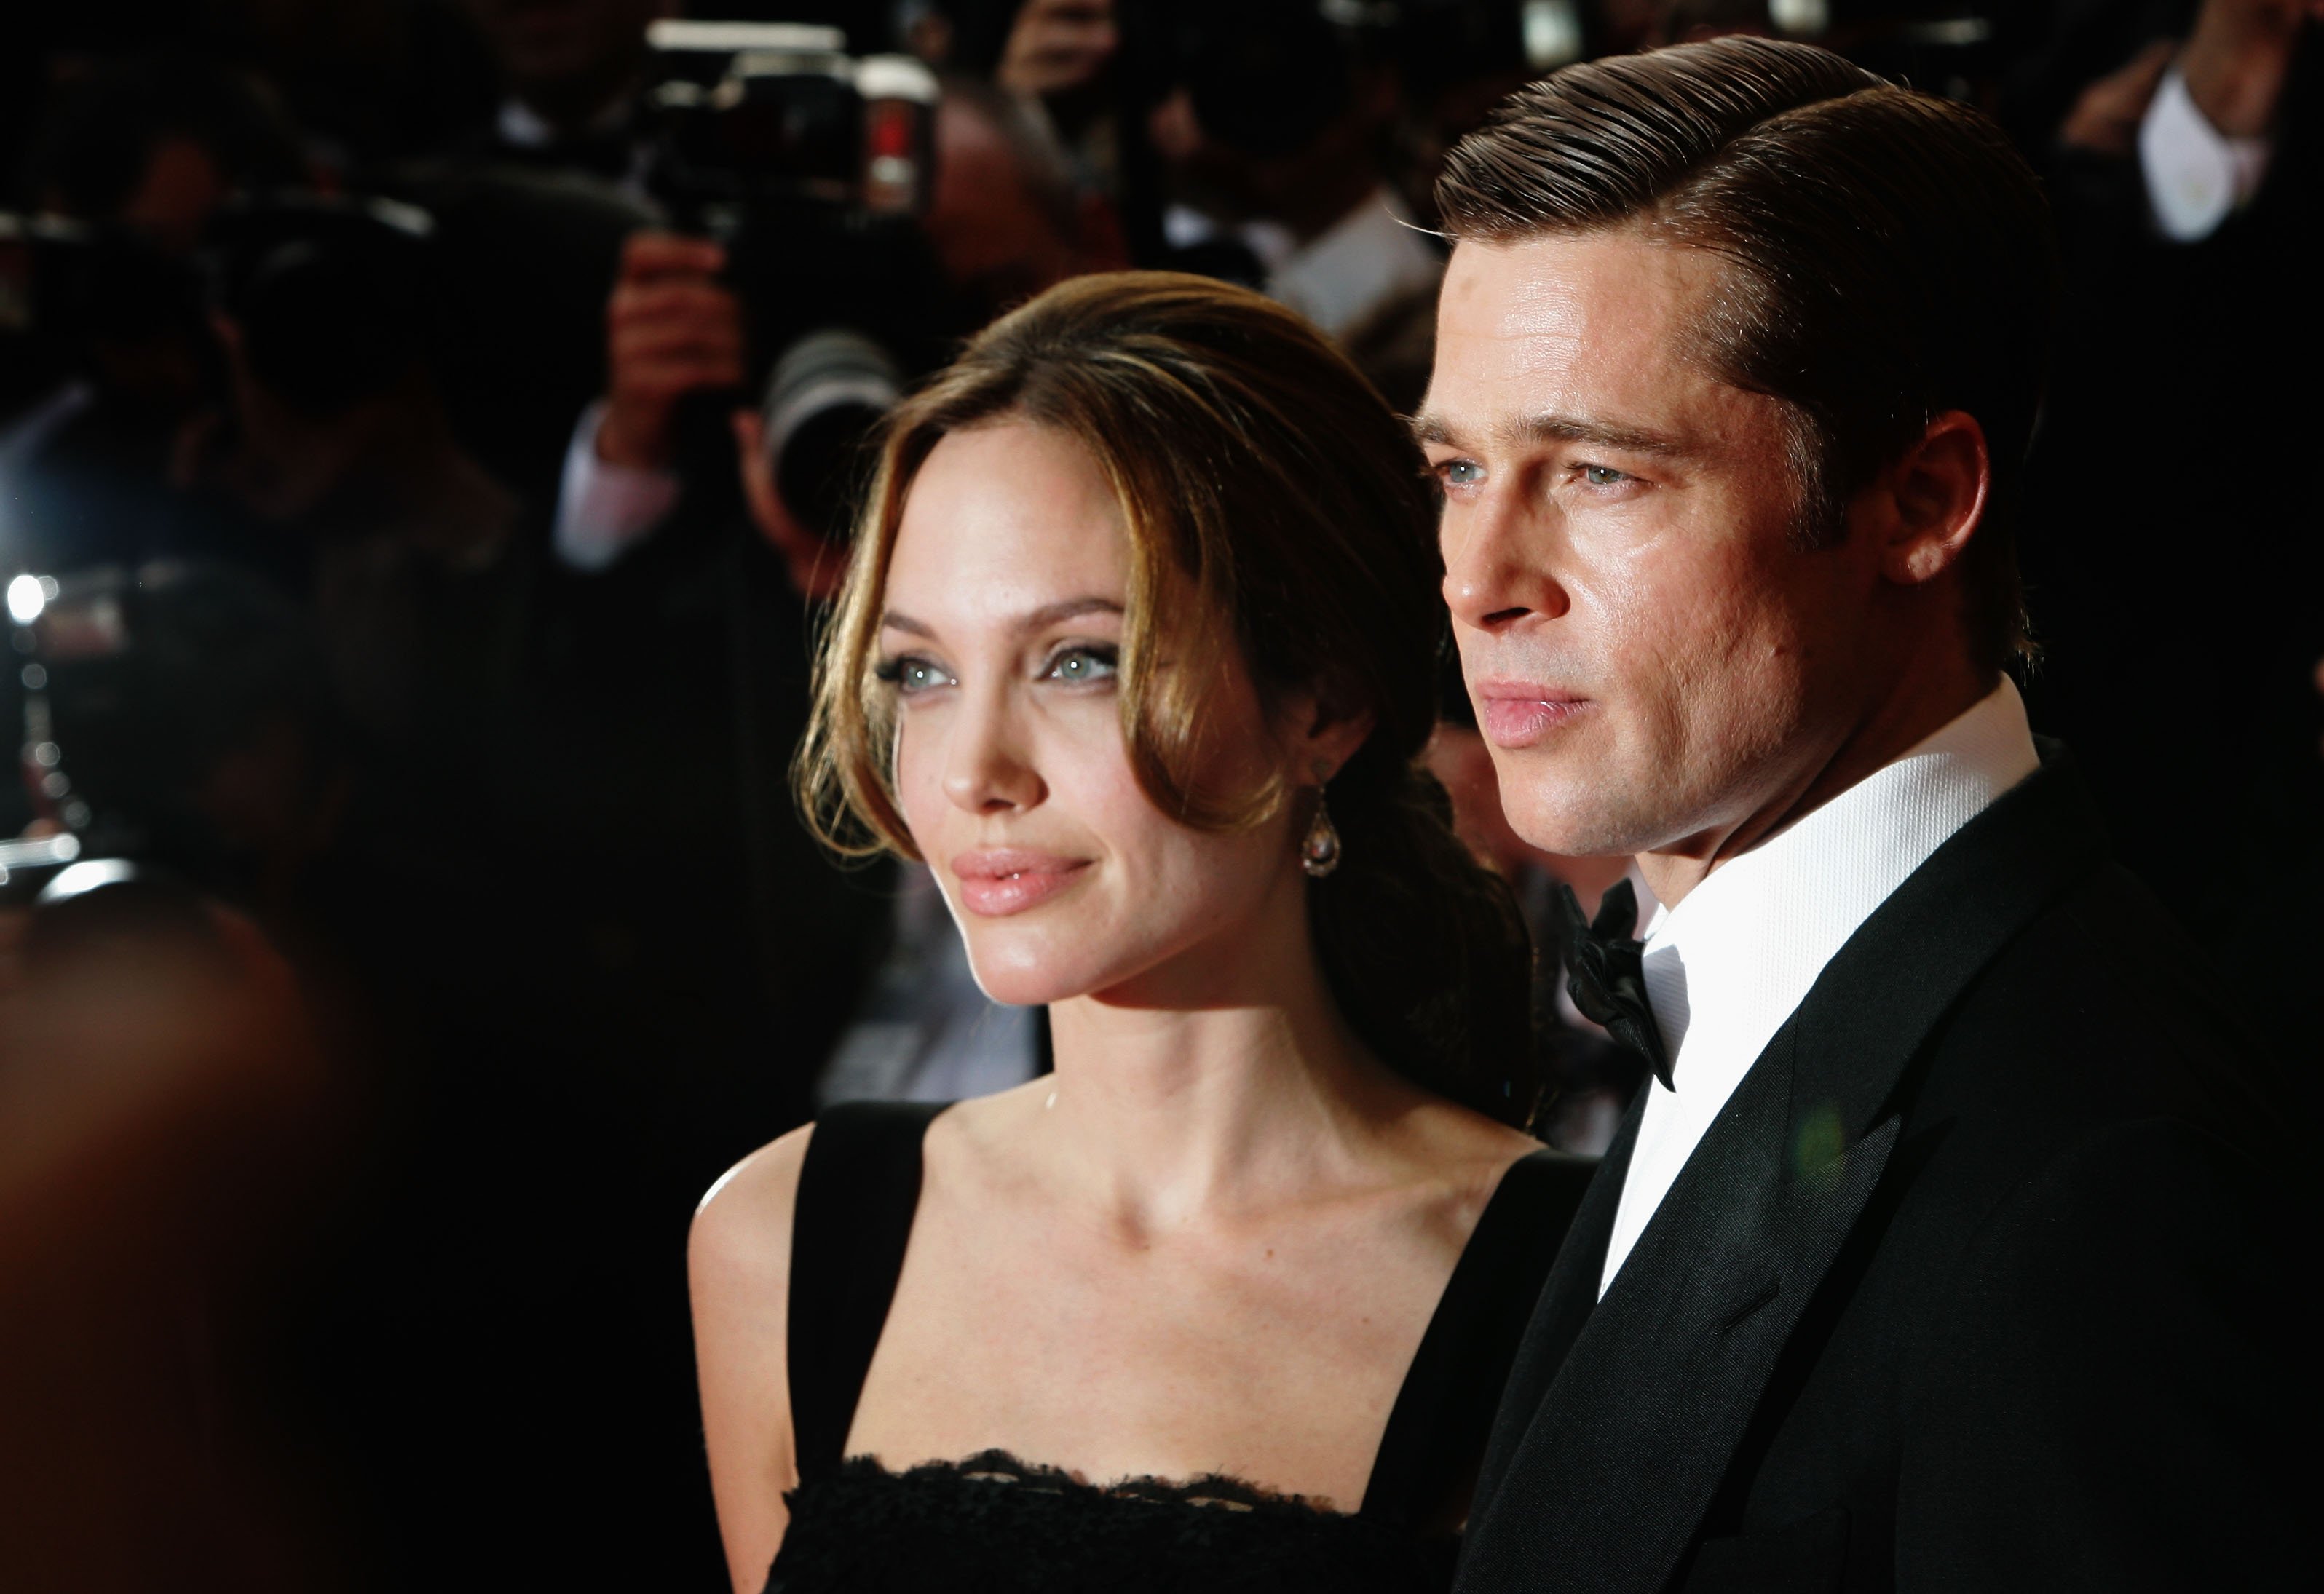 Angelina Jolie and Brad Pitt attend the premiere of "A Mighty Heart" in Cannes, France on May 21, 2007 | Photo: Getty Images